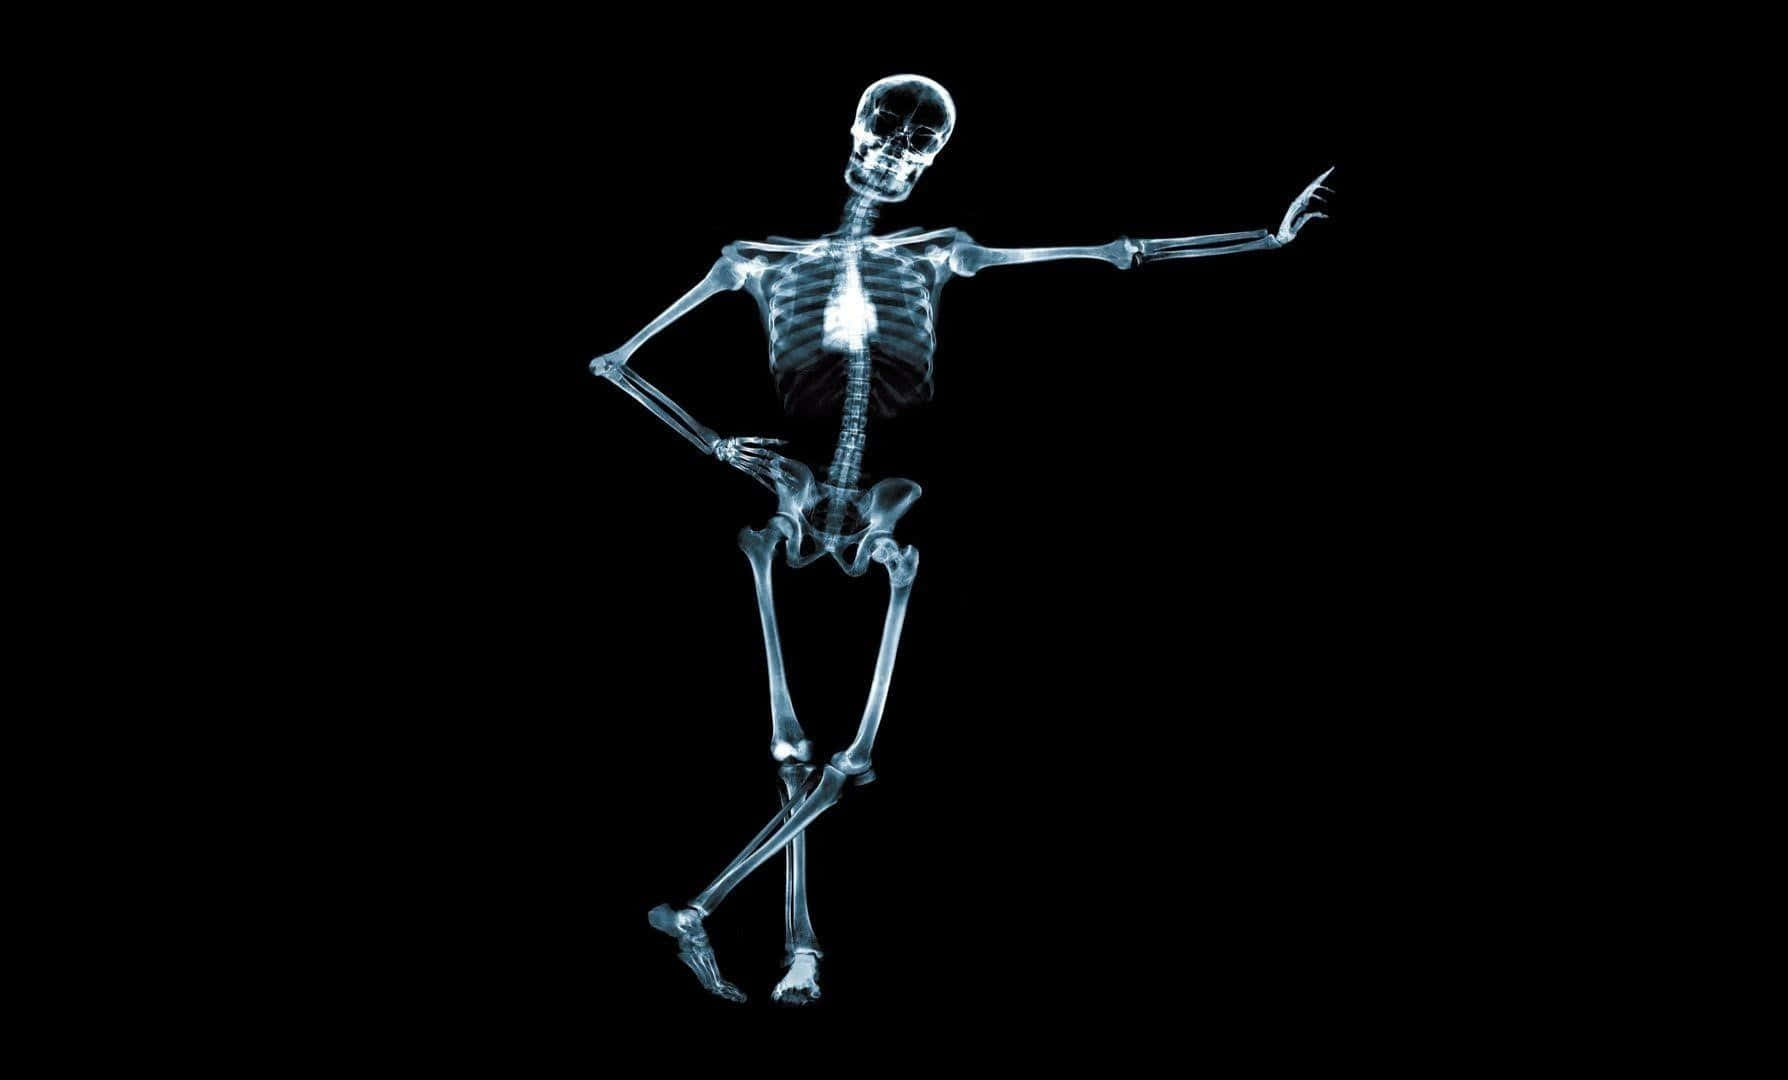 A Skeleton Is Standing On A Black Background